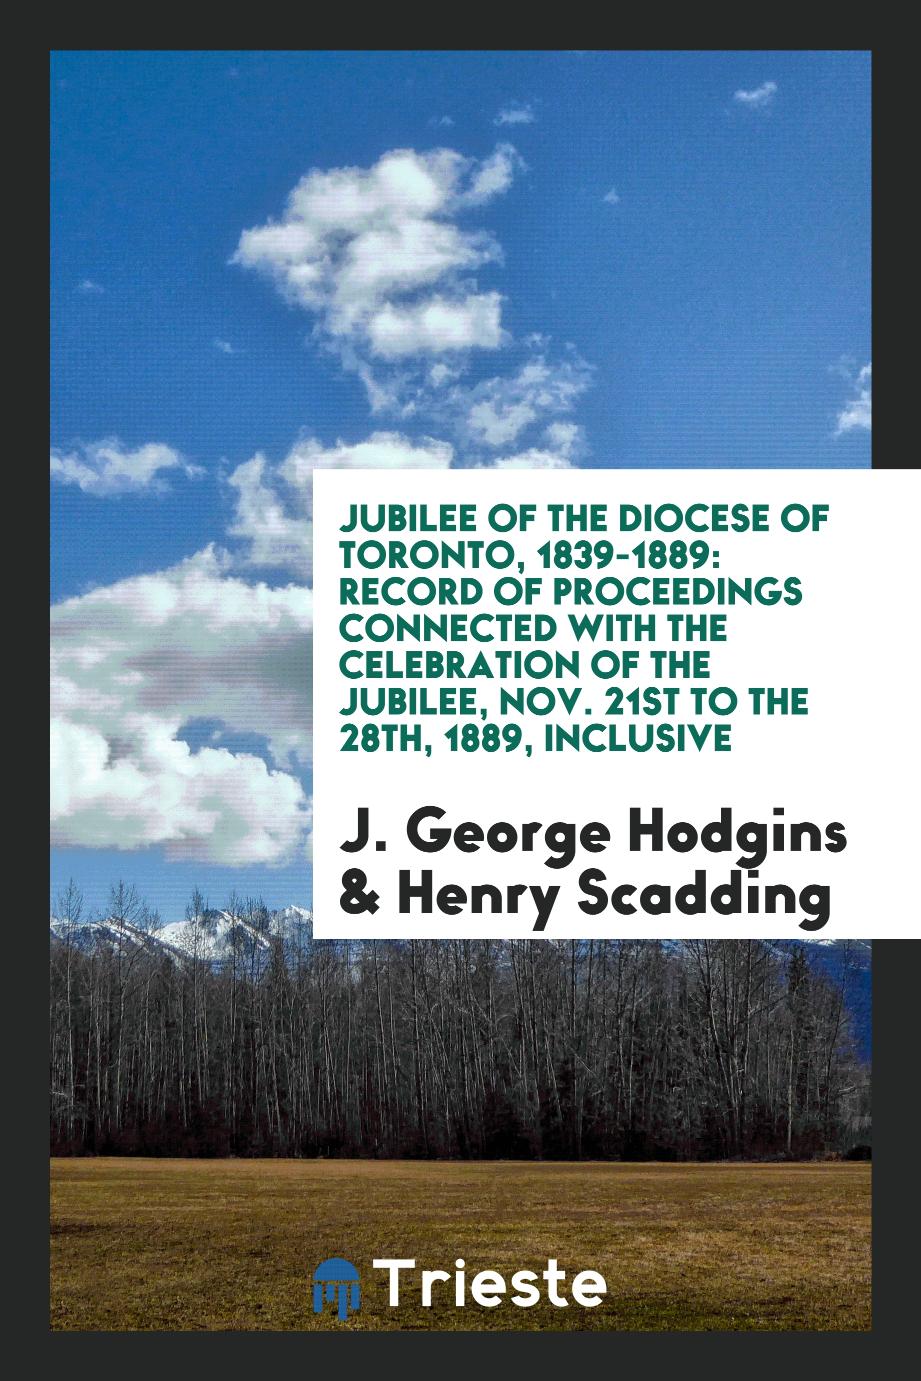 Jubilee of the Diocese of Toronto, 1839-1889: record of proceedings connected with the celebration of the Jubilee, Nov. 21st to the 28th, 1889, inclusive